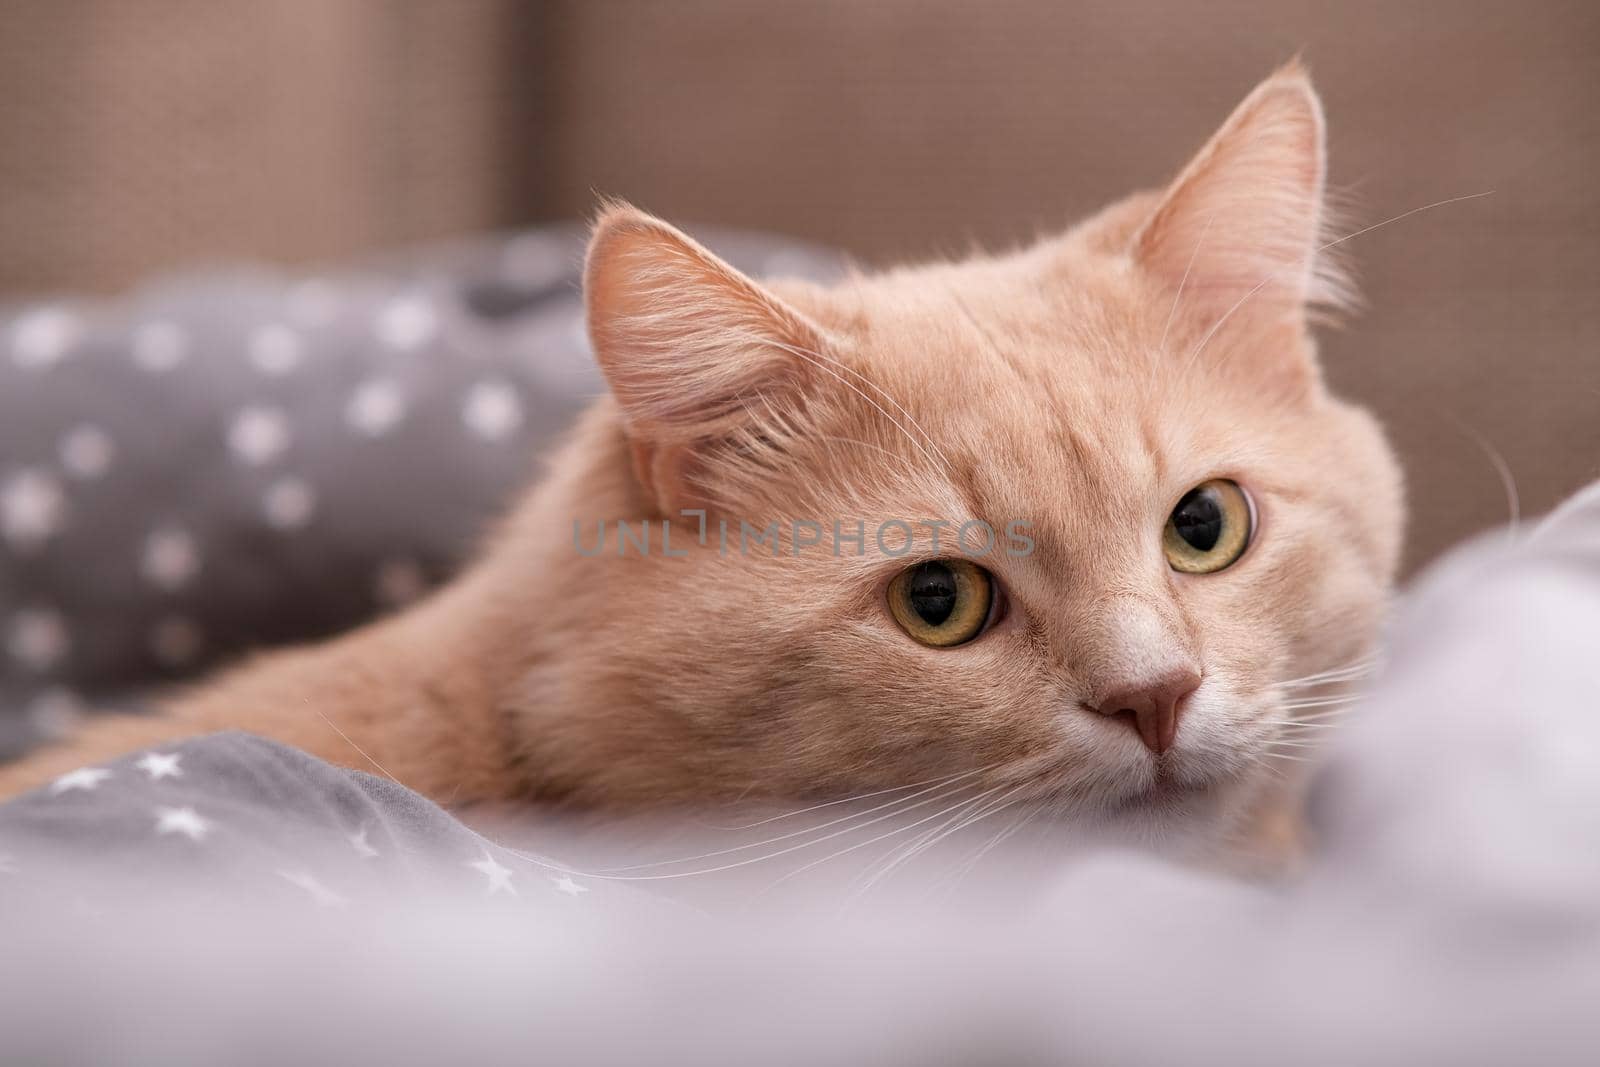 Fluffy ginger cat on a gray bedspread. by N_Design